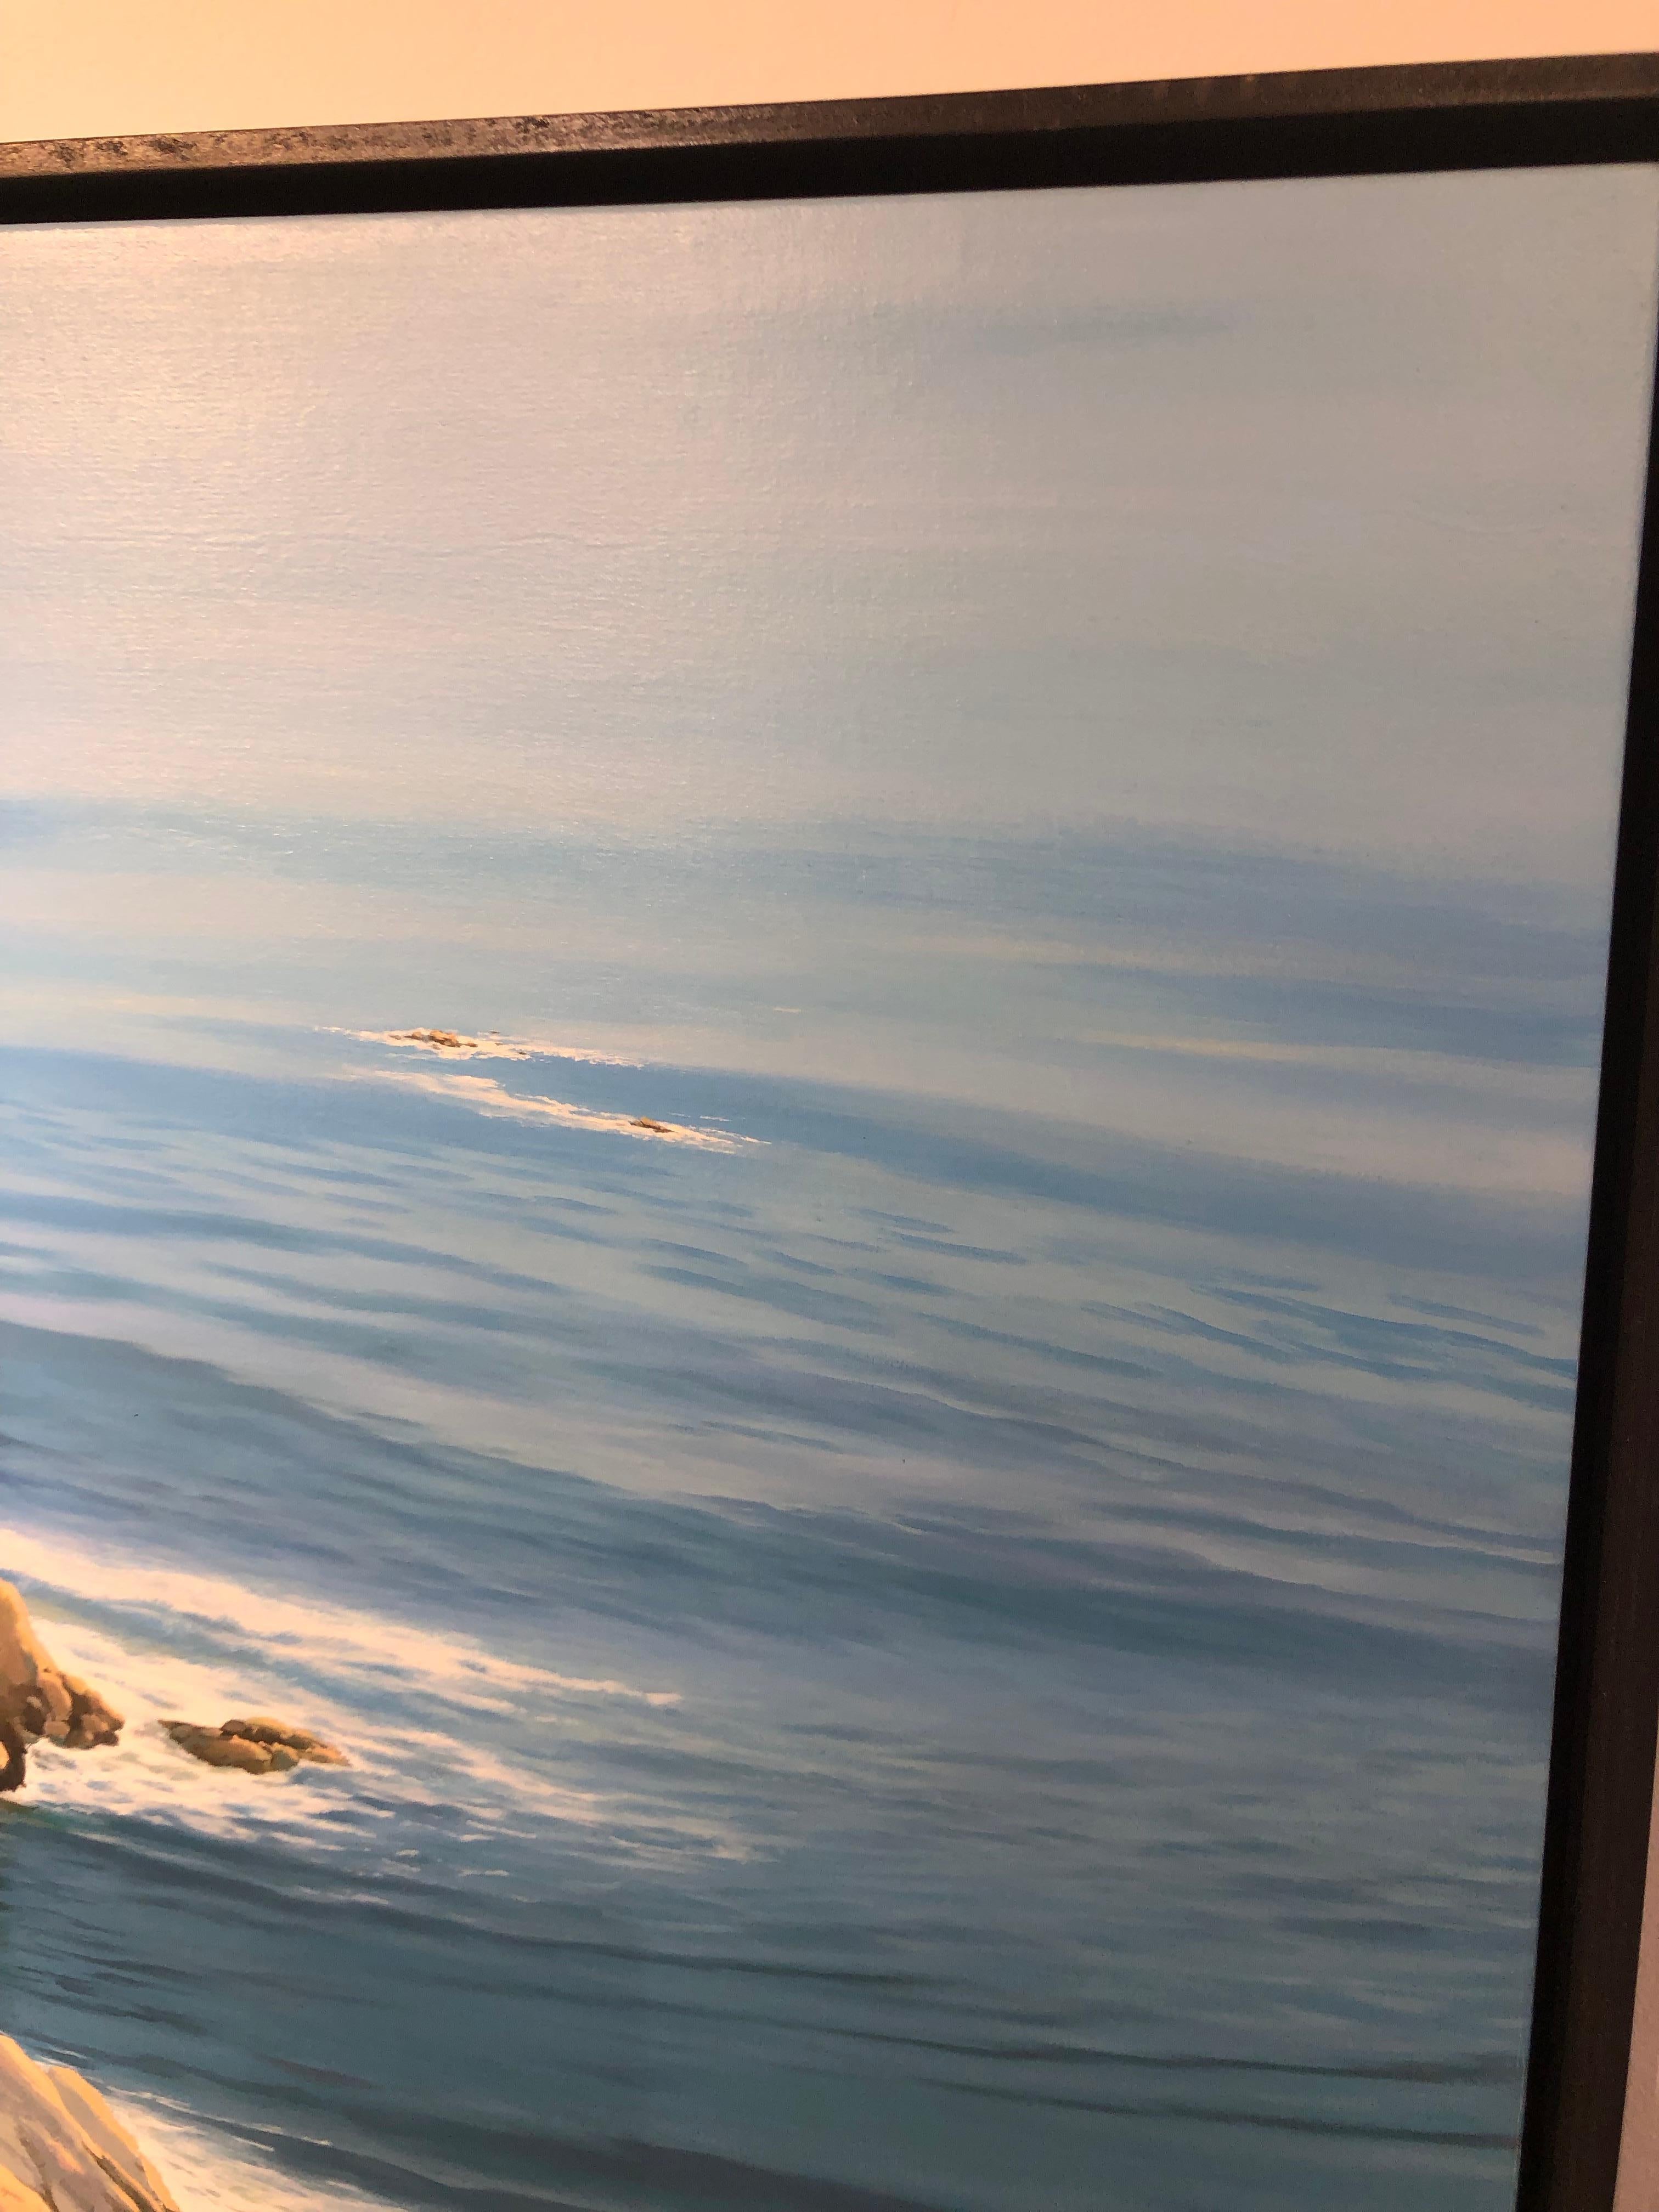 This original oil painting depicts on oceanside scene bathed in light with meticulous detail.  The artist often includes a narrative element to his work.  In this painting a bike has been laid down near the edge of a cliff, it's tires partially